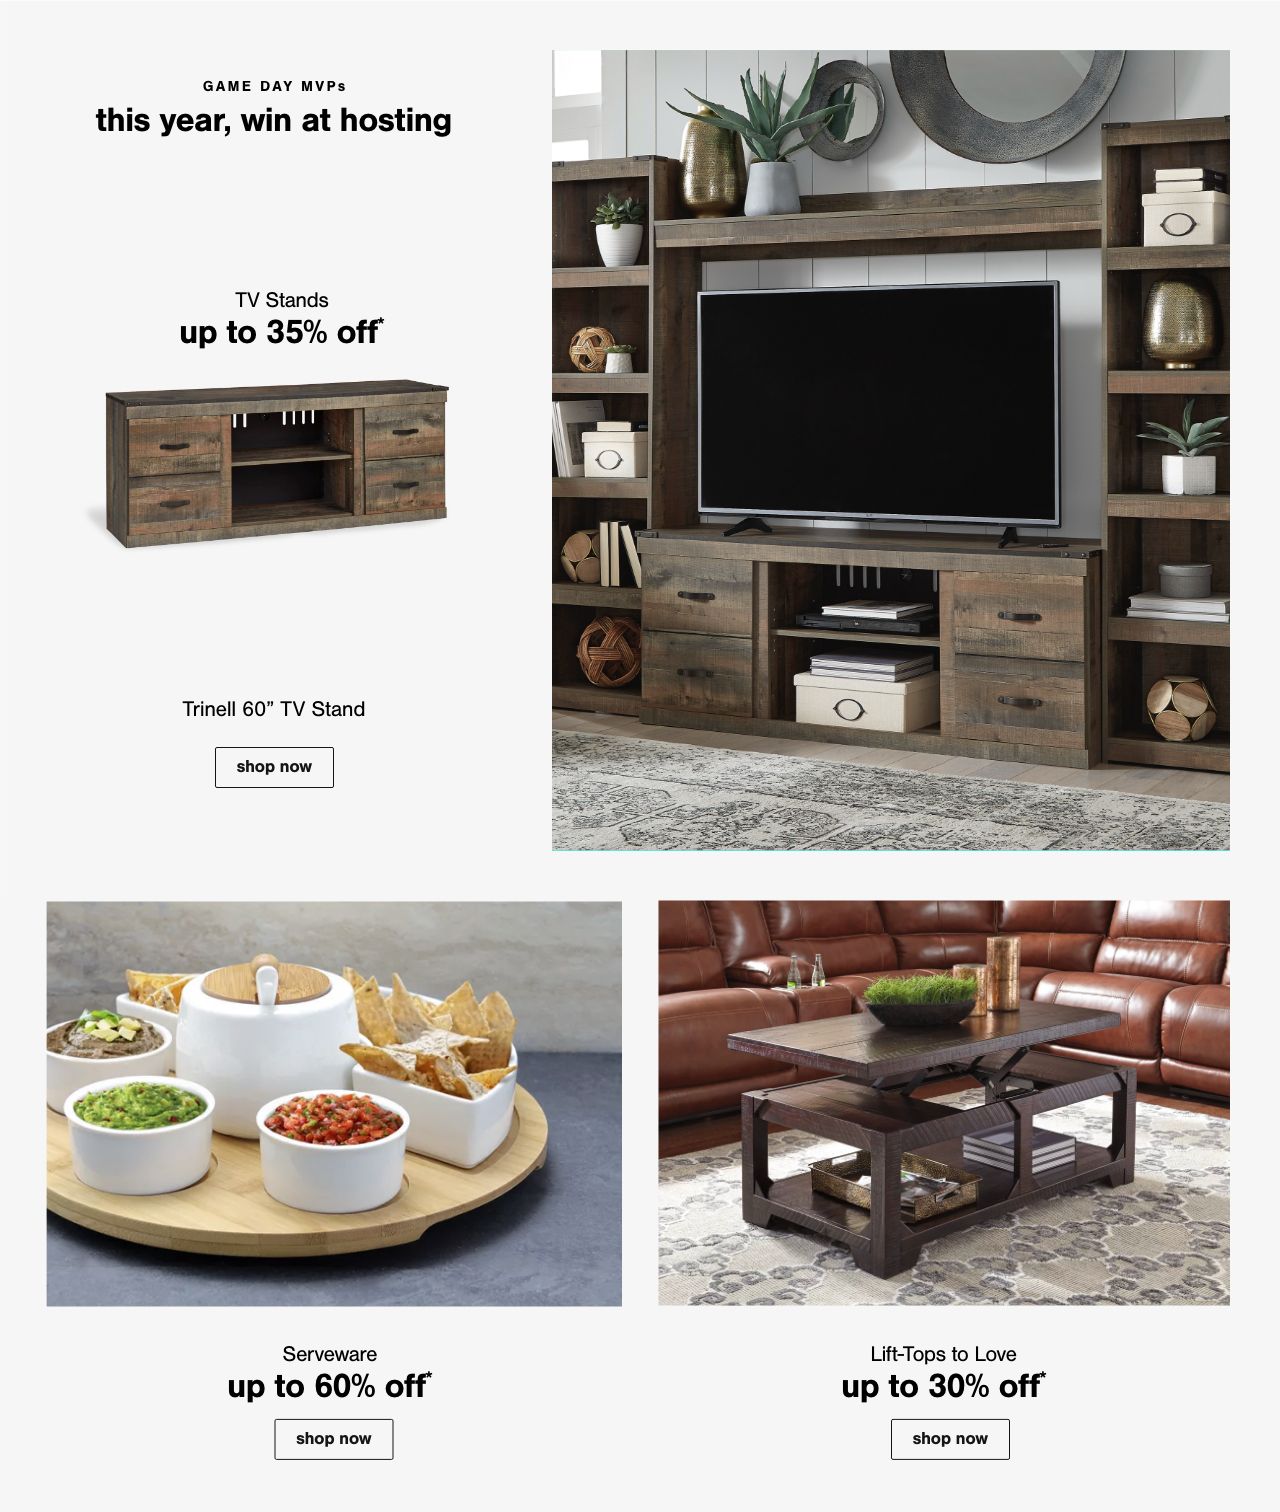 TV Stands Up to 35% Off*, Serveware up to 60% Off*, Lift Tops to Love Up to 30% Off*